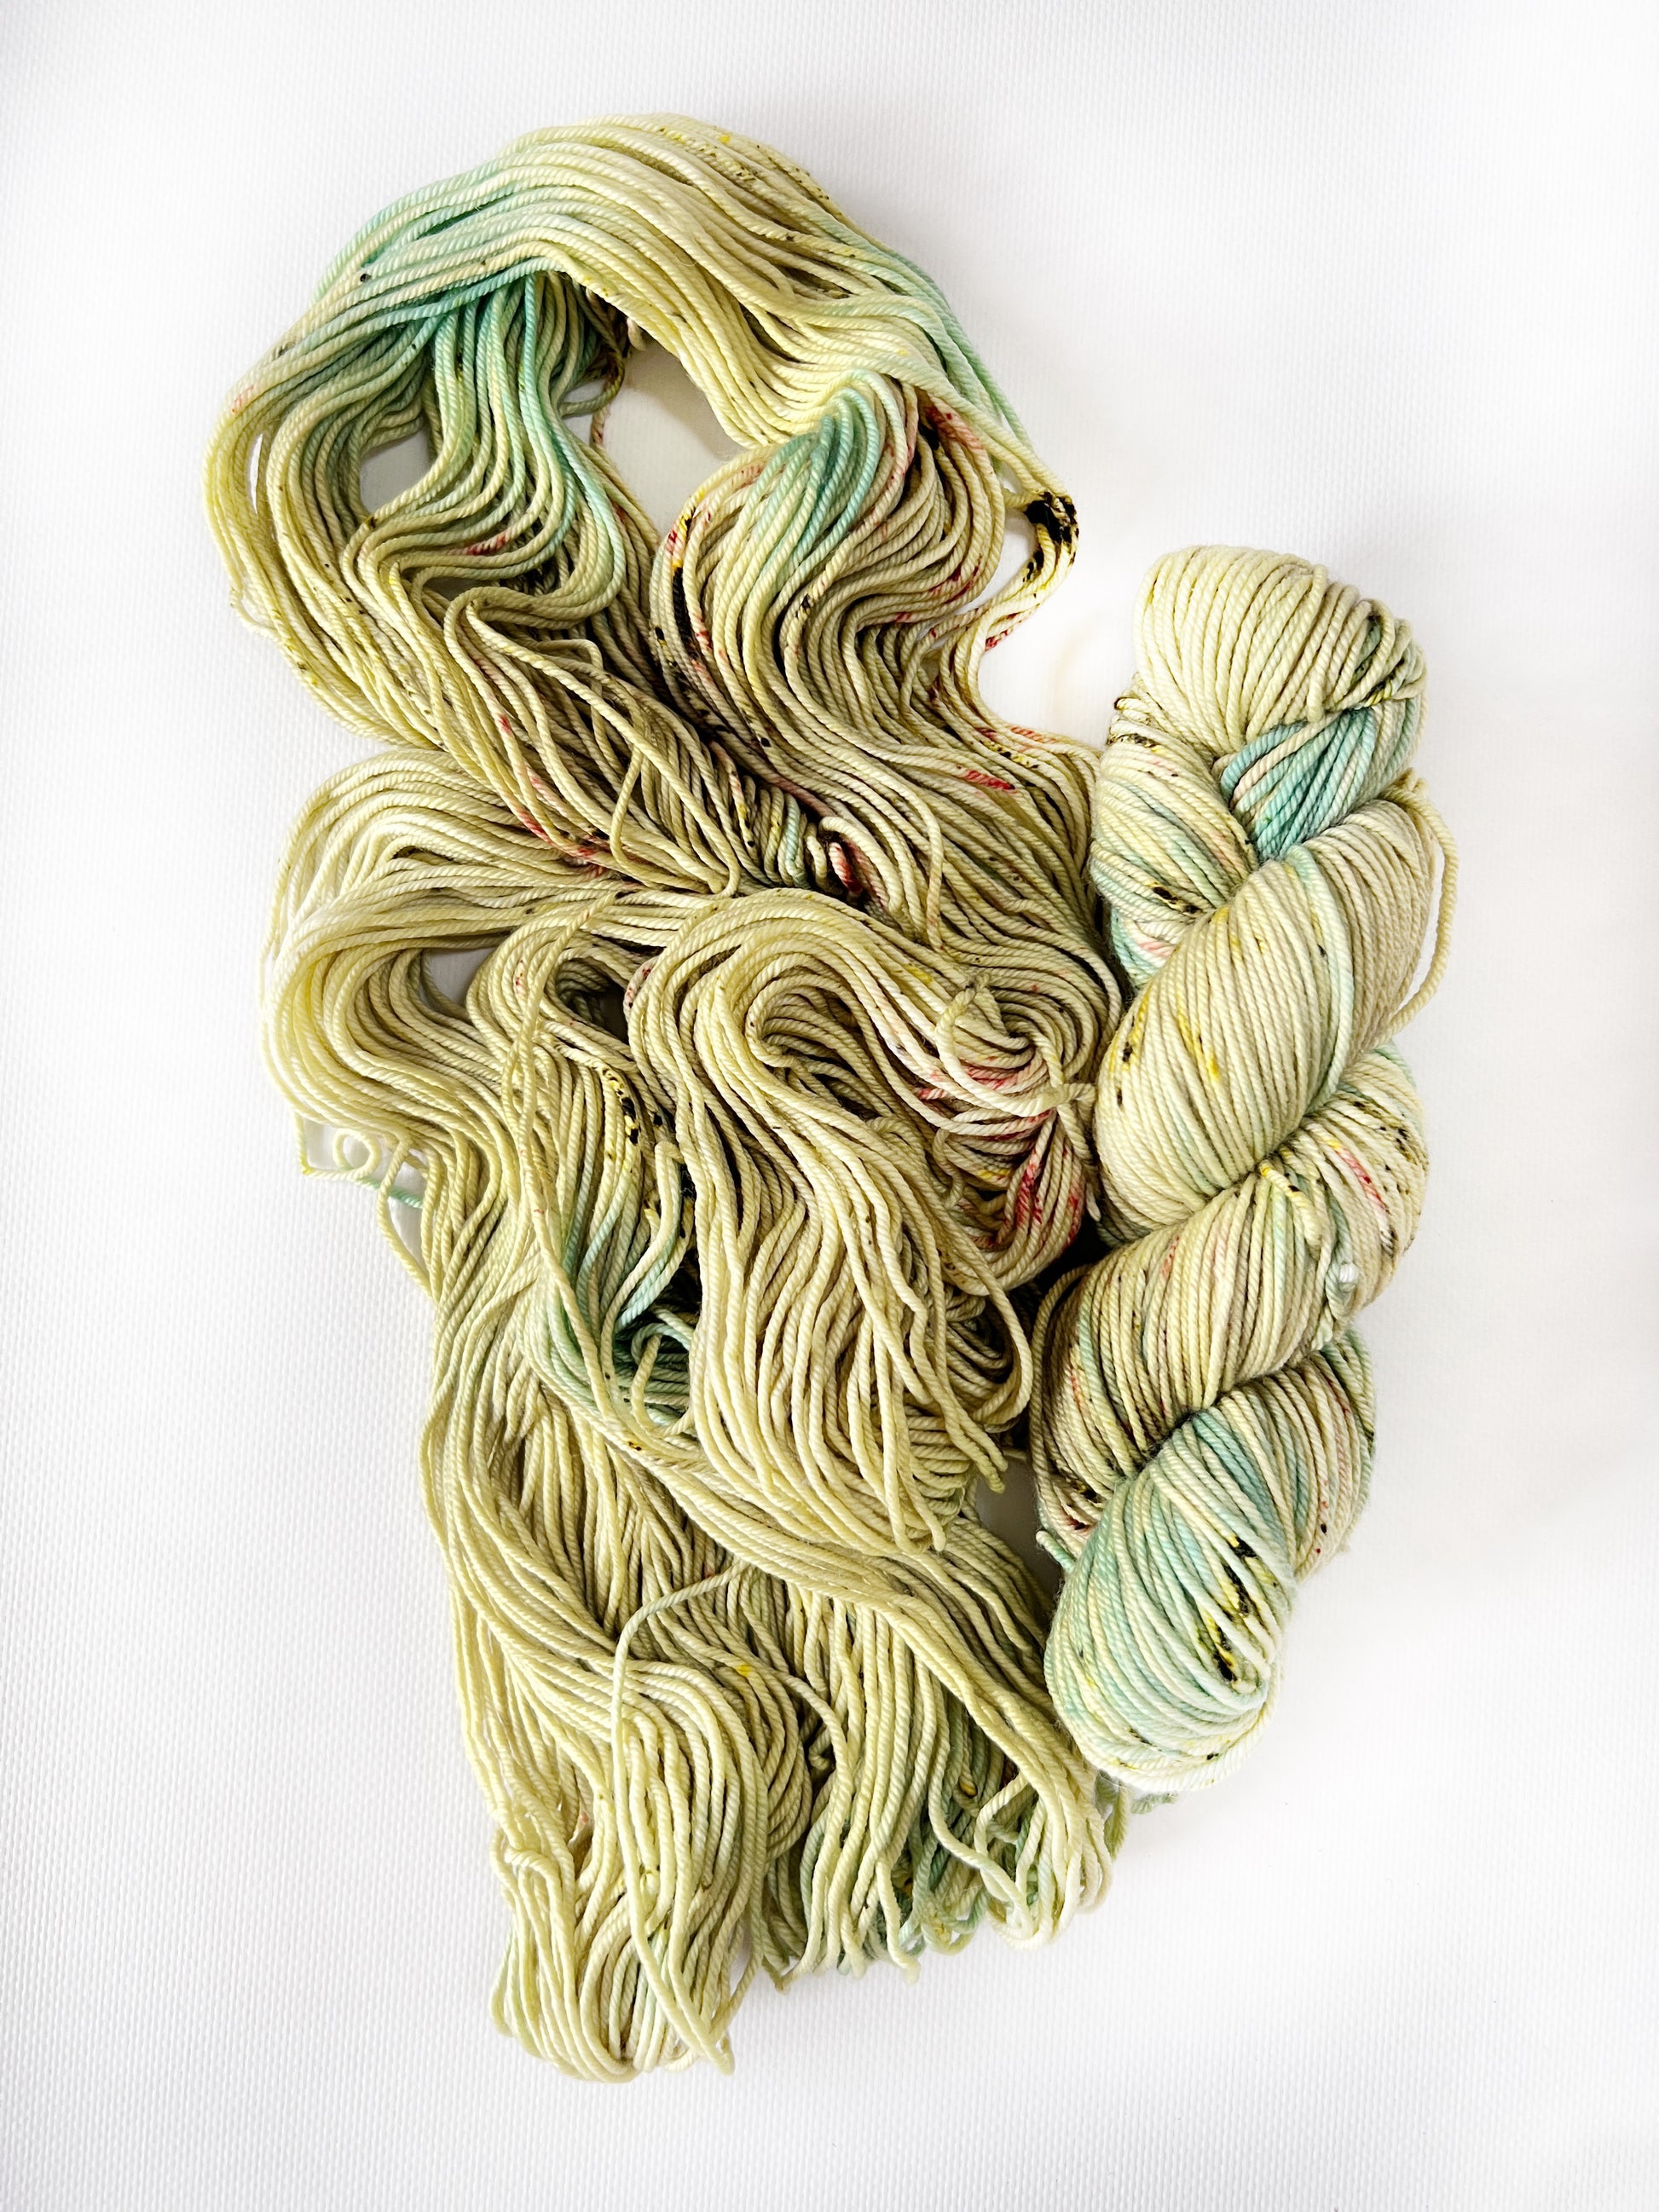 Ginger Root - Worsted 3 Ply - Okanagan Dye Works